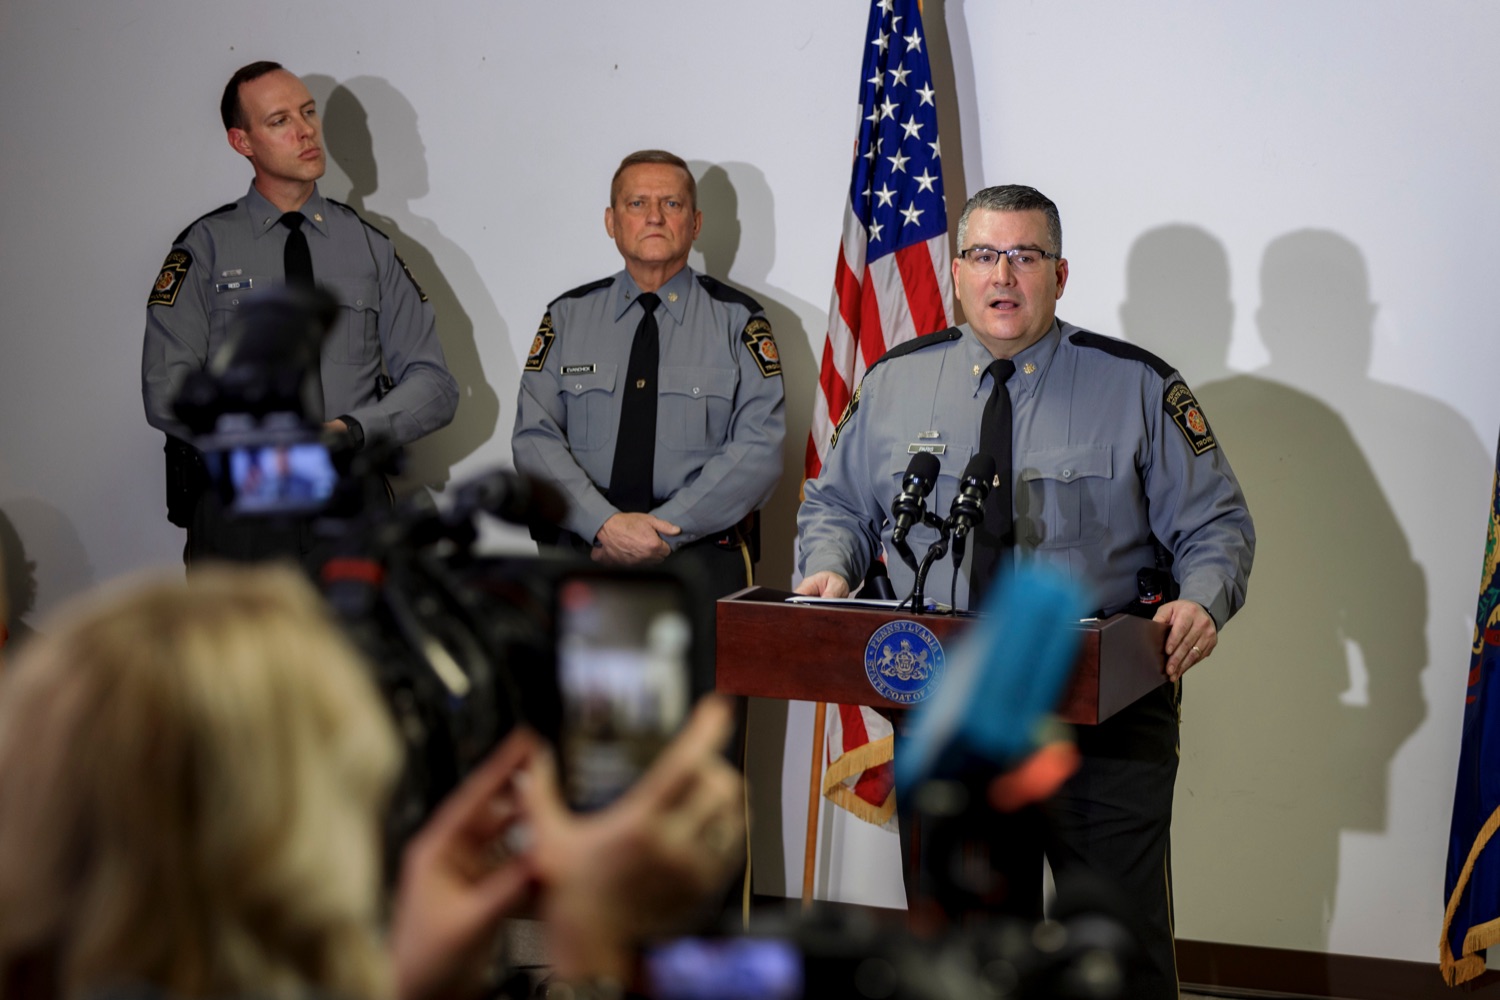 Major Christopher Paris, Area III Commander of State Police, speaks during a press conference to discuss the apprehension of Bryan C. Kohberger inside Monroe County District Attorney Office in Stroudsburg on Tuesday, January 3, 2023. Kohberger was taken into custody early Friday by members of Troop N and the Special Emergency Response Team at a home in Chestnuthill Township, in Monroe County, in connection to the homicides of four University of Idaho students on November 13.<br><a href="https://filesource.amperwave.net/commonwealthofpa/photo/22481_PSP_Kohberger_NK_005.JPG" target="_blank">⇣ Download Photo</a>